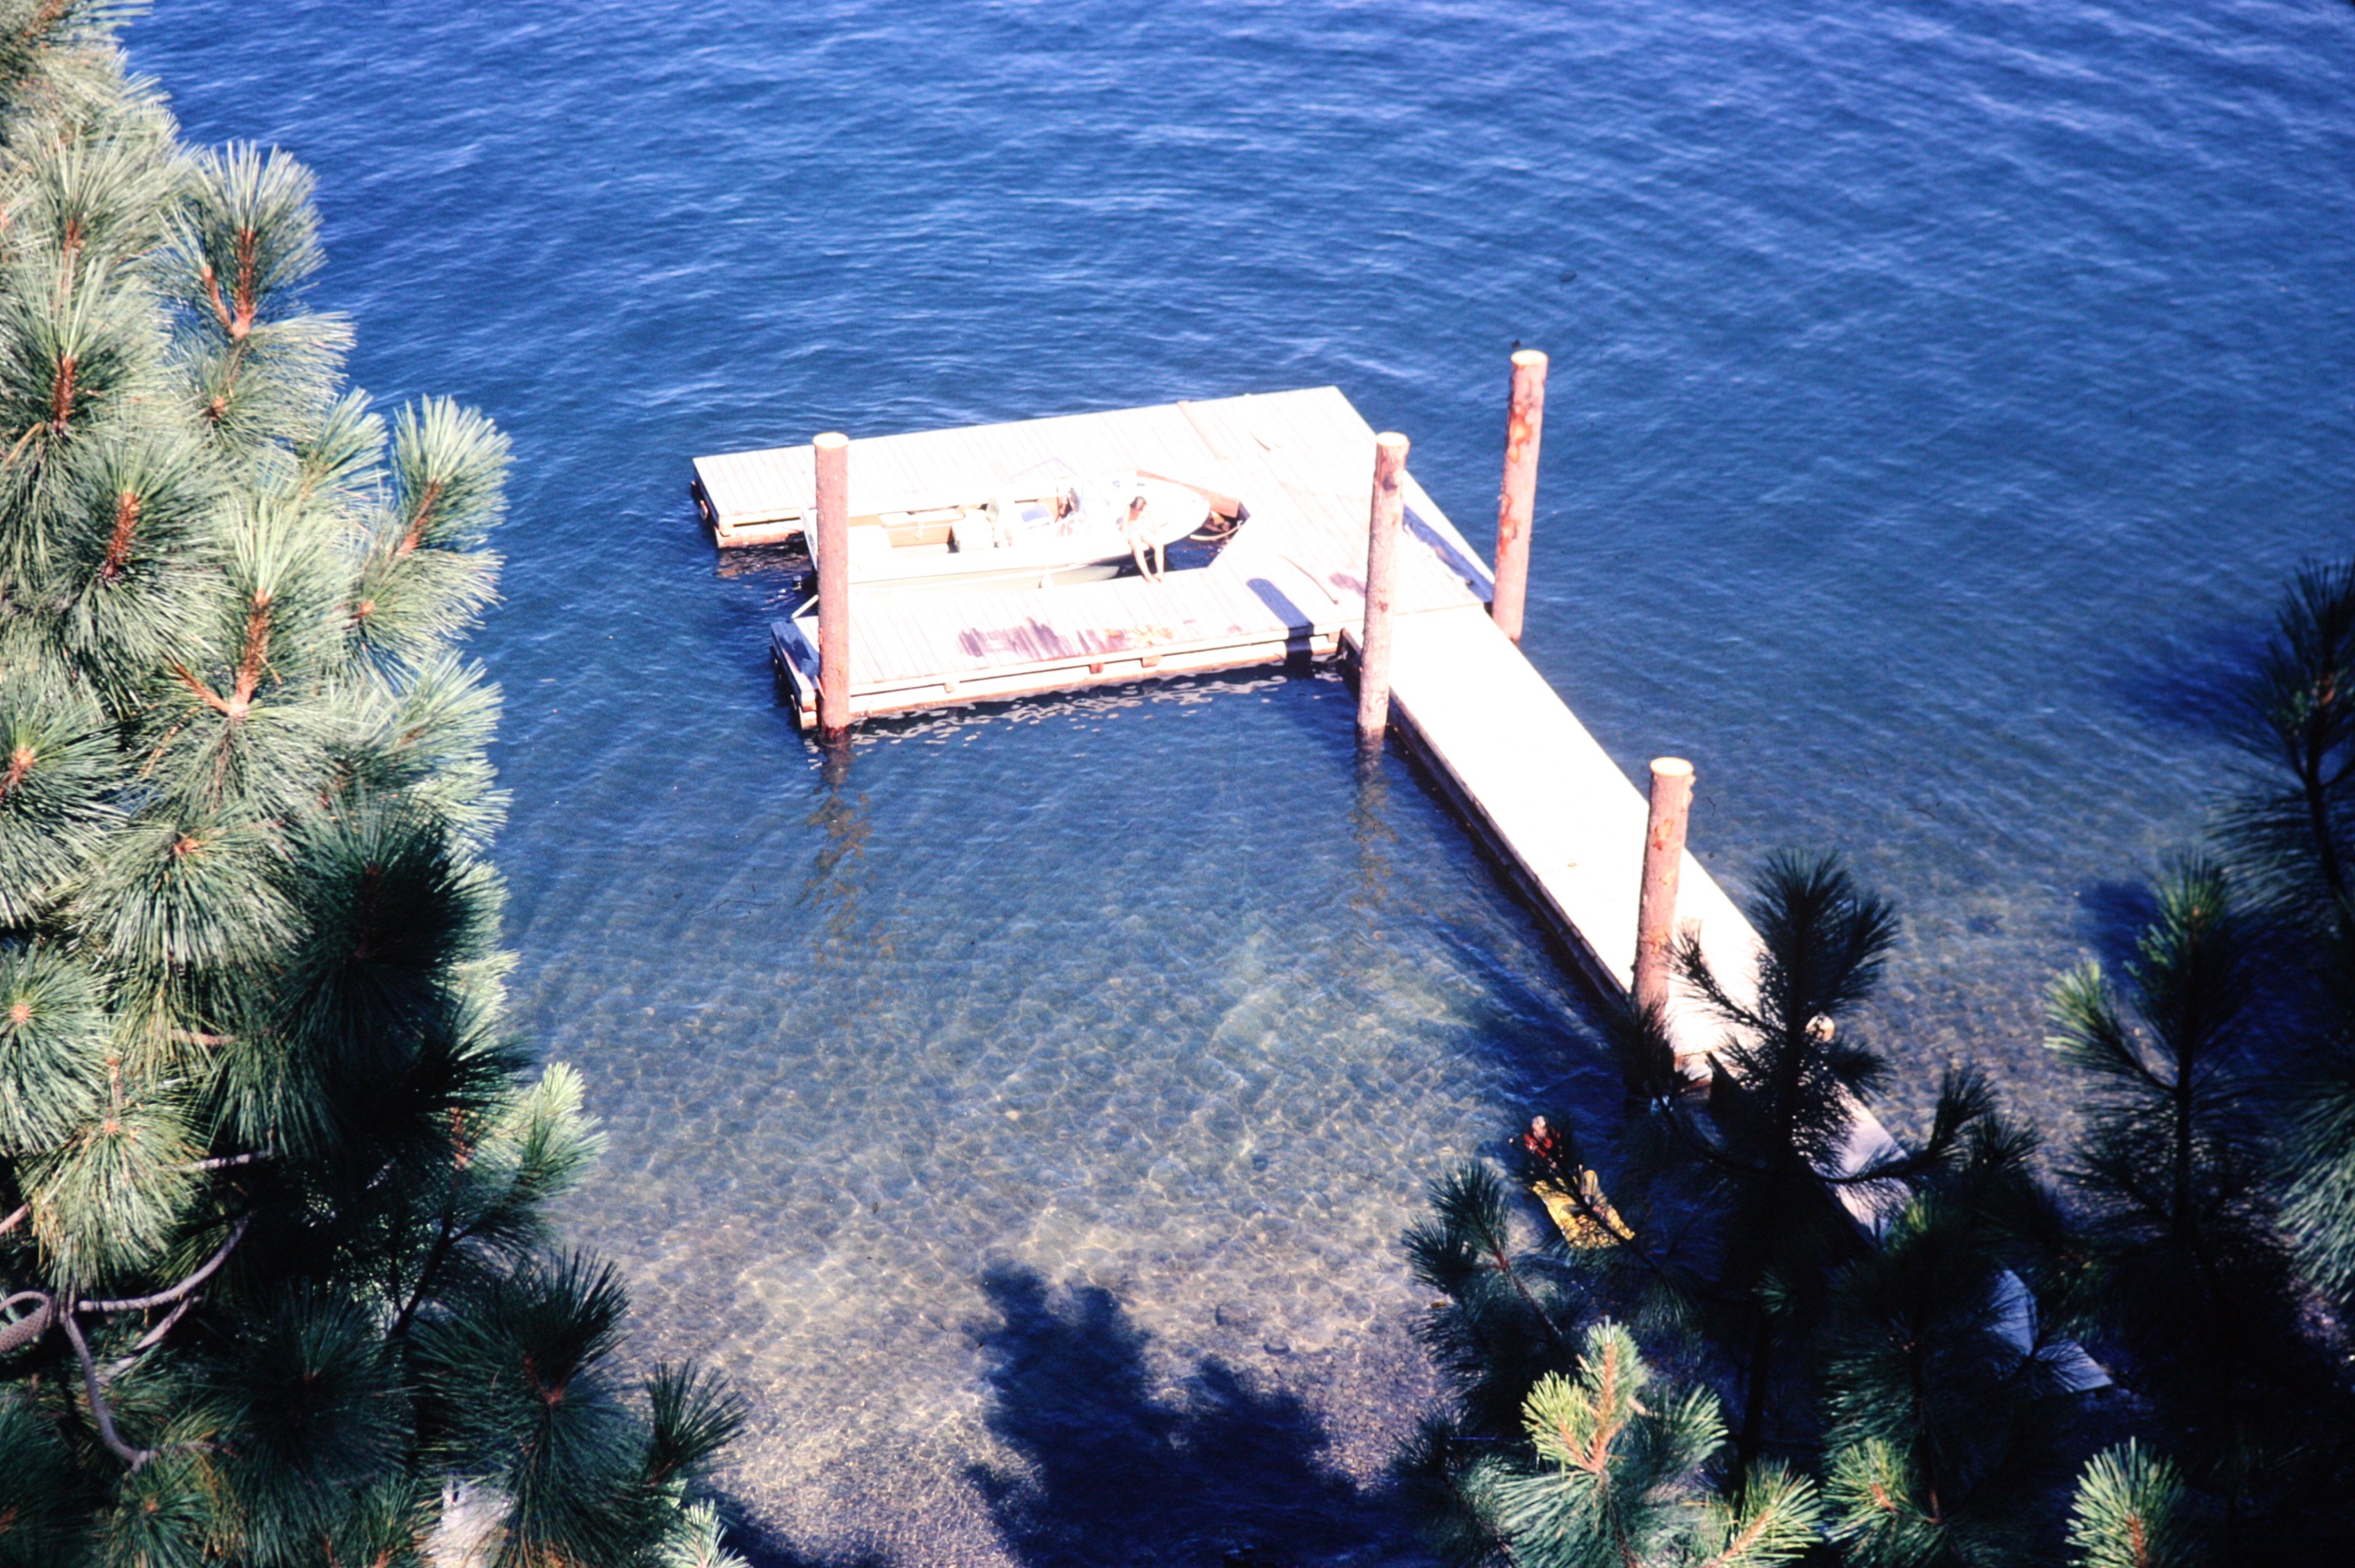 View of dock from cabin deck, Coeur d'Alene Lake, circa 1972